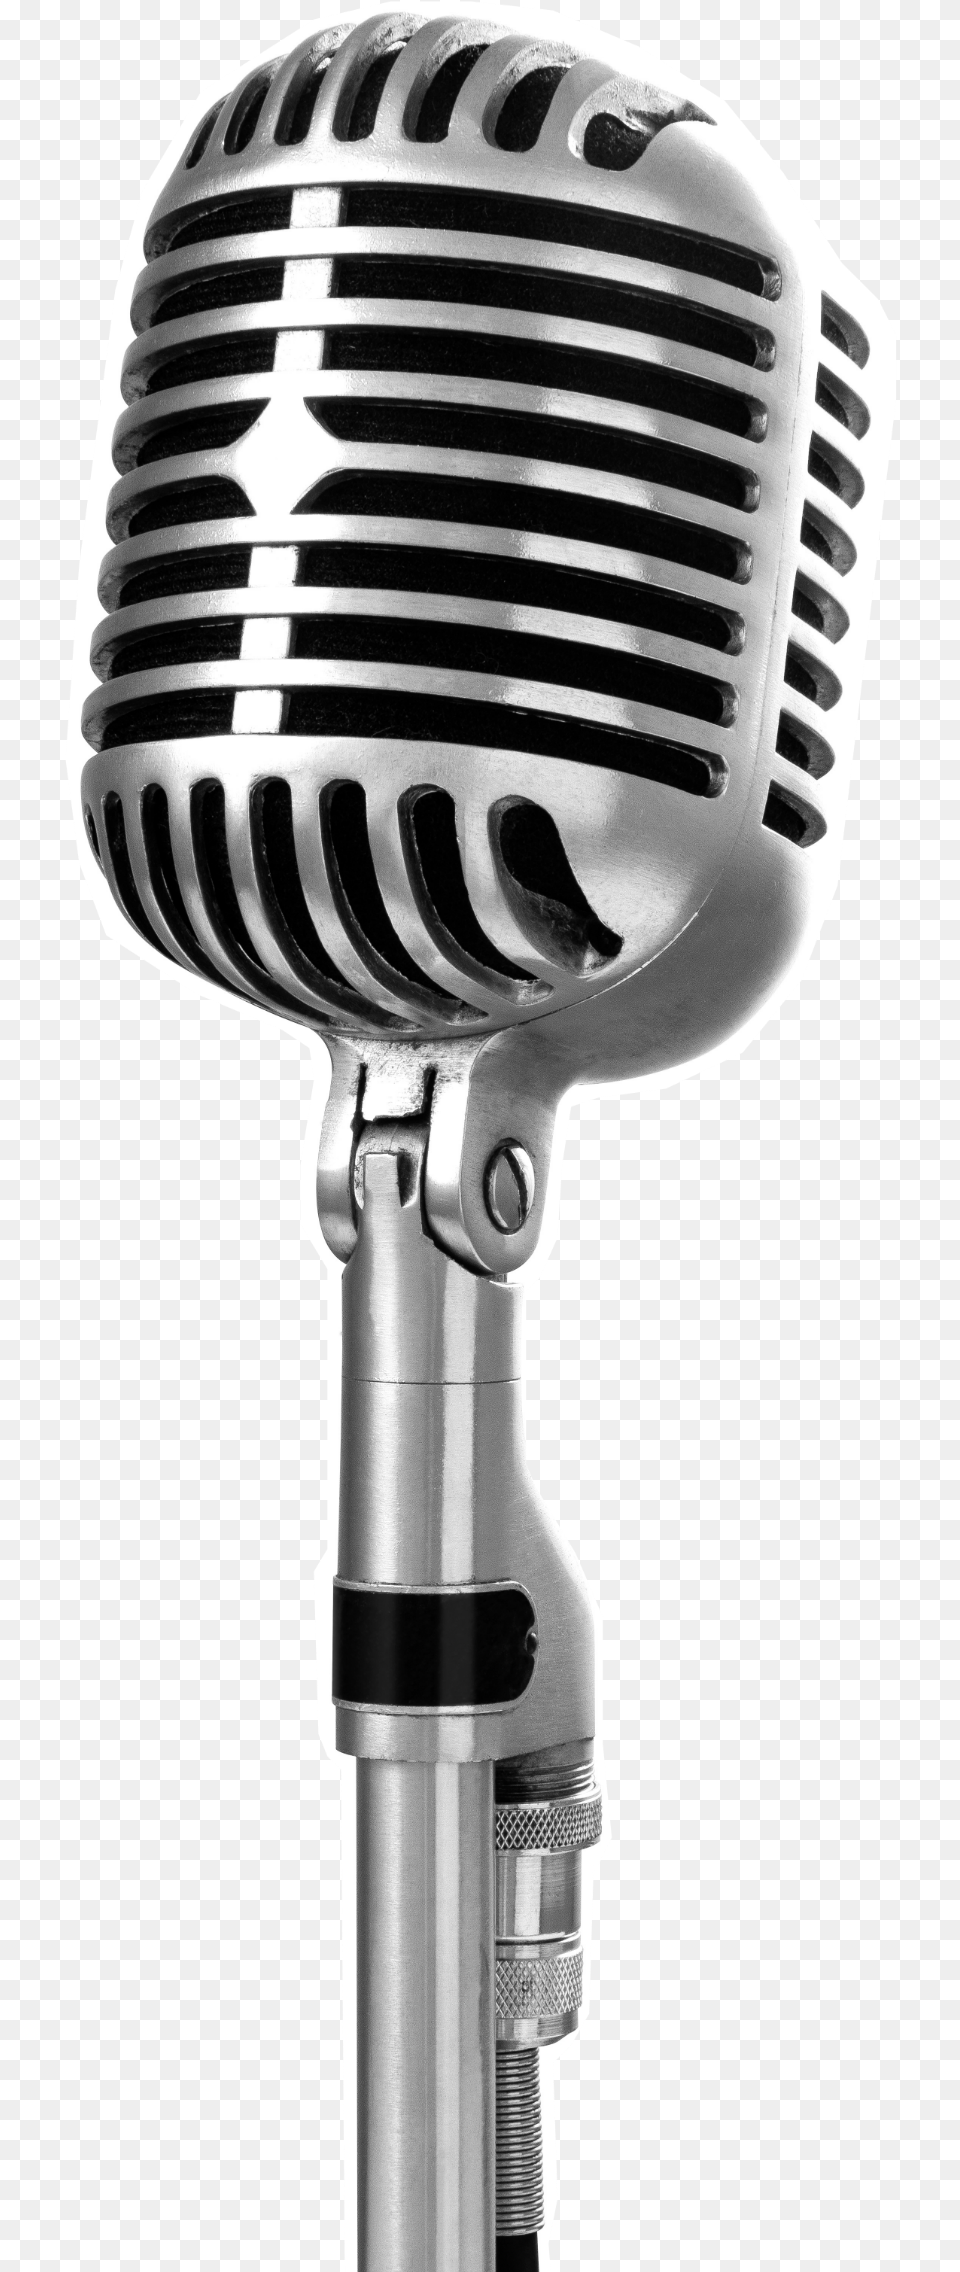 Microphone Good News From Finland Portable, Electrical Device Free Transparent Png